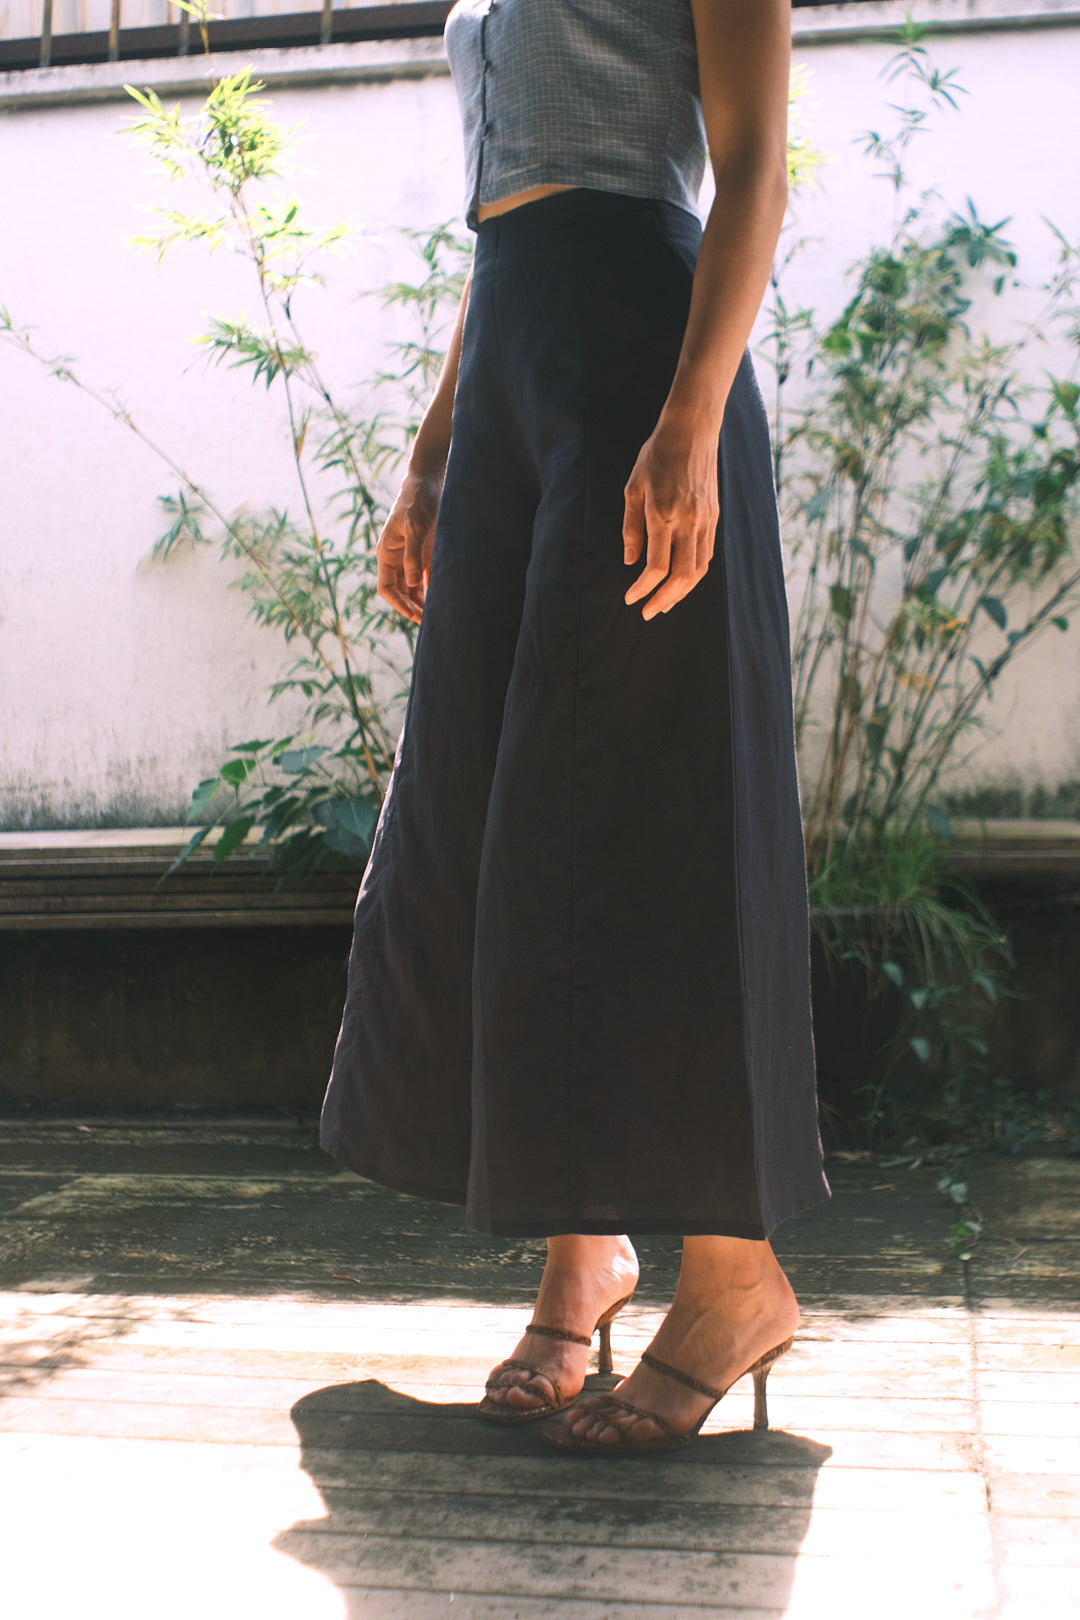 FLARE CULOTTES in navy